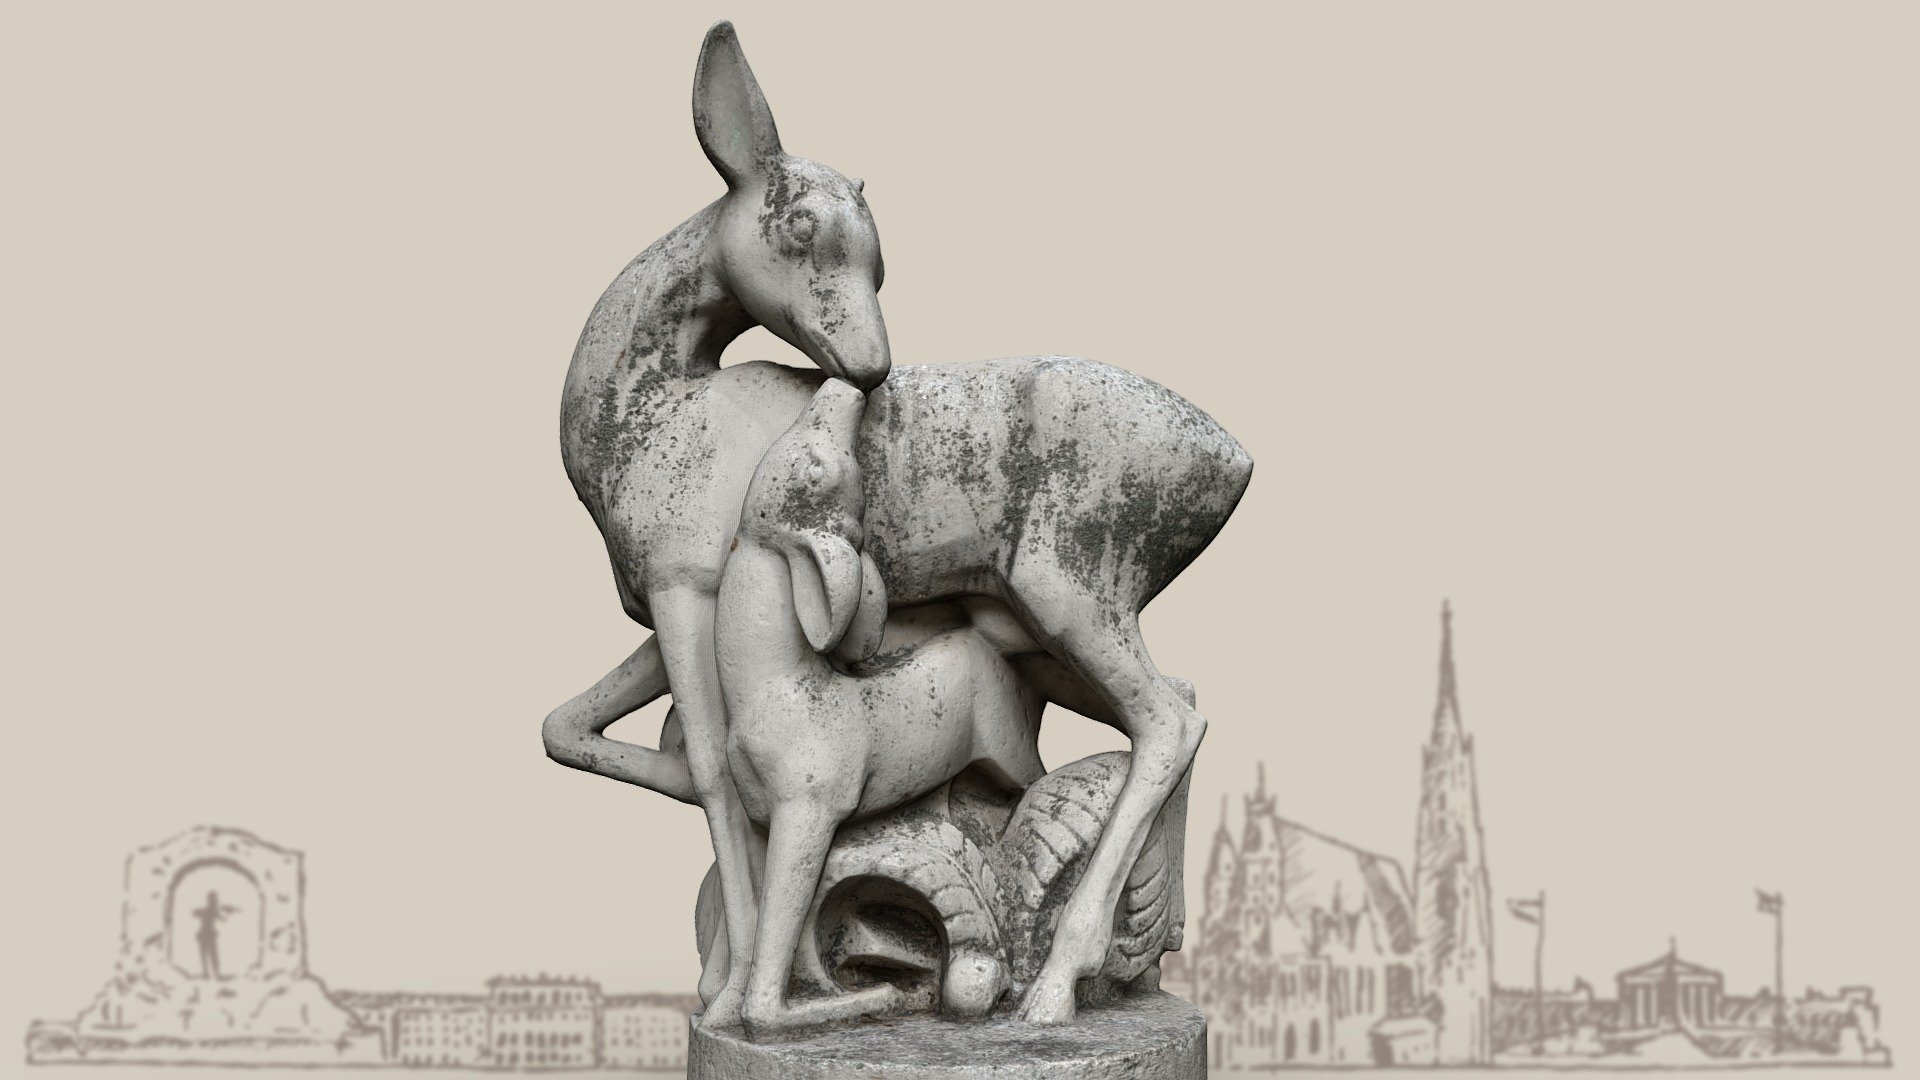 Roe deer mother with fawn on a concrete pedestal in Vienna Währing. The deer group serves as a decorative figure of a fountain that is no longer in use. The sculpture by Rudolf Schmidt dates from around 1931.

Rudolf Schmidt (1894-1980) was an Austrian sculptor, medalist and art historian. He created numerous sculptures as well as the 50 Schilling coin commemorating the 100th birthday of Theodor Körner in 1973. Schmidt was awarded the City of Vienna Prize for Fine Arts in 1951 and the Austrian Cross of Honor for Science and Art in 1973 3d model